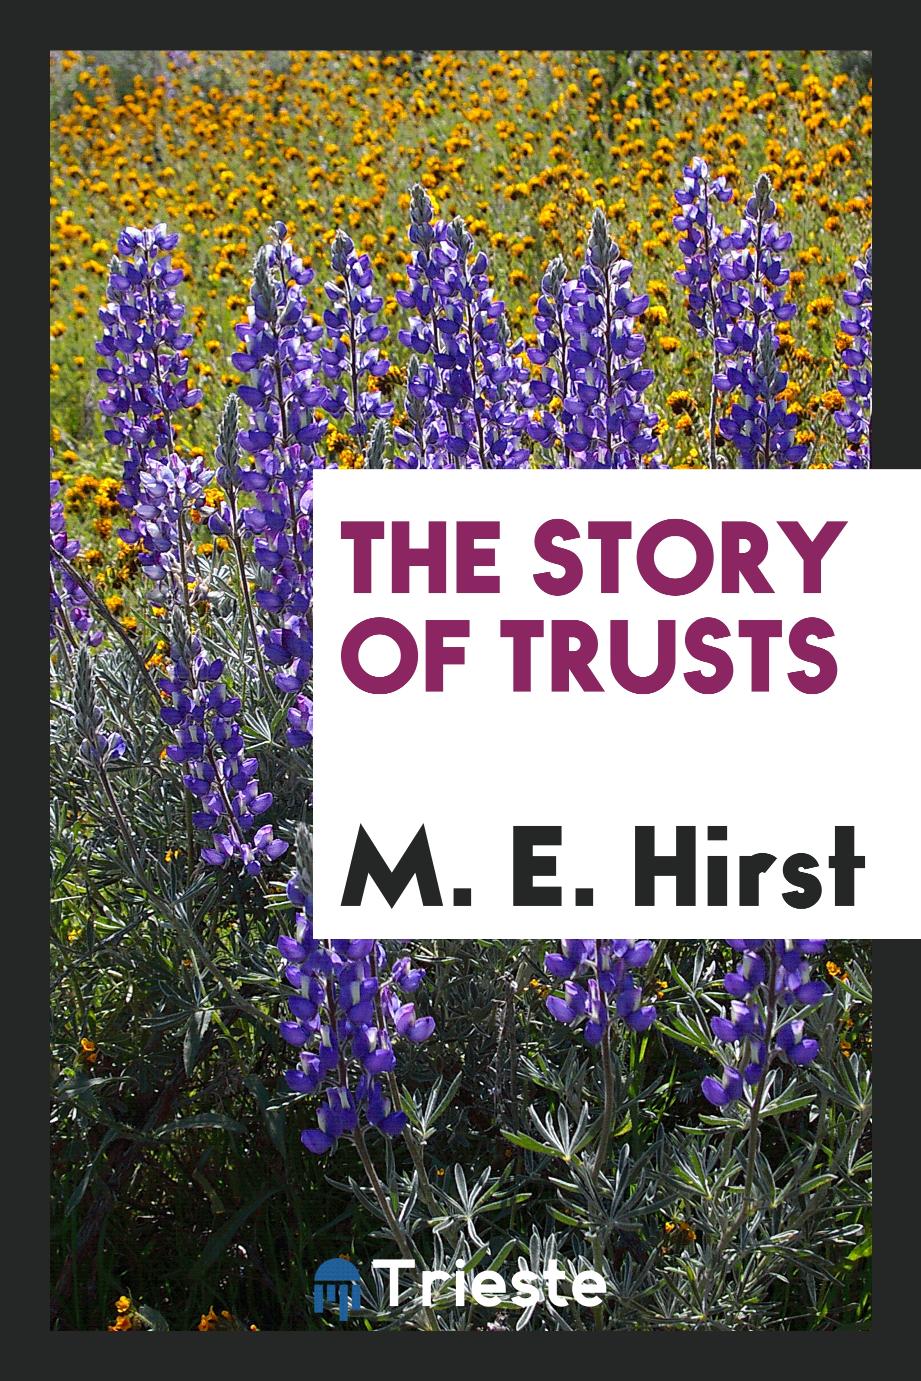 The story of trusts